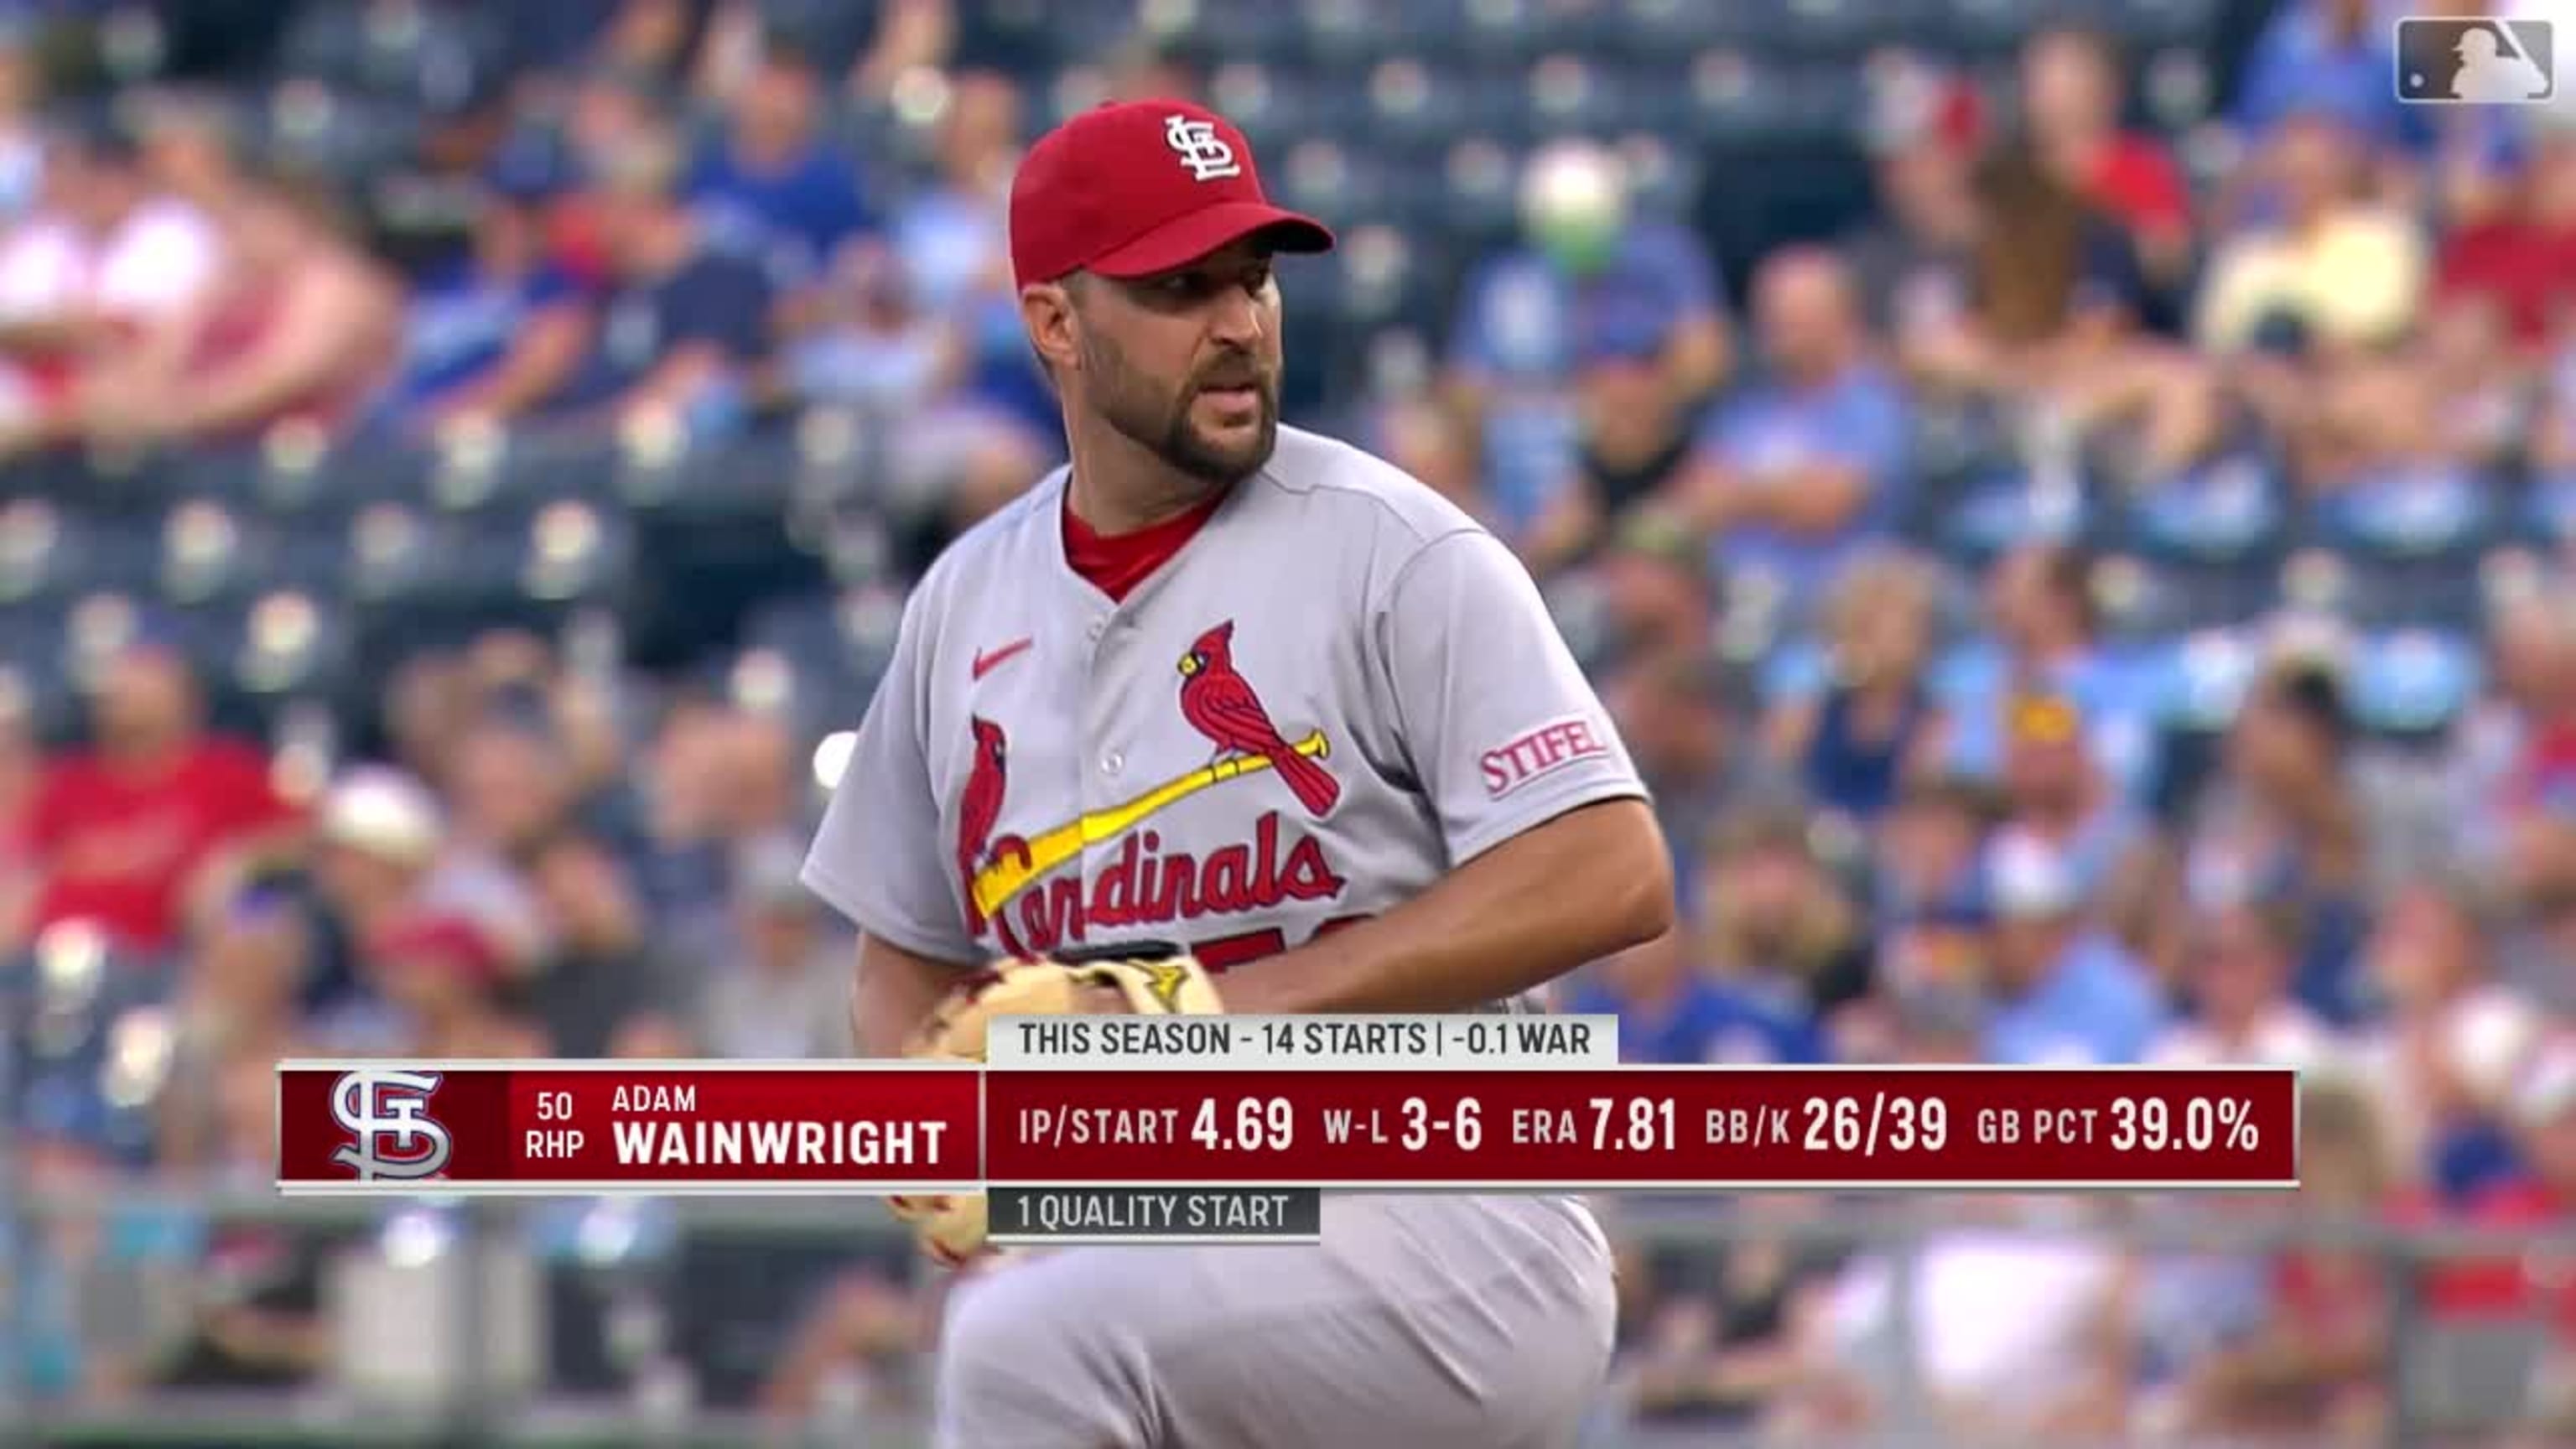 In an Era of Throwers, Adam Wainwright Is a Pitcher - The New York